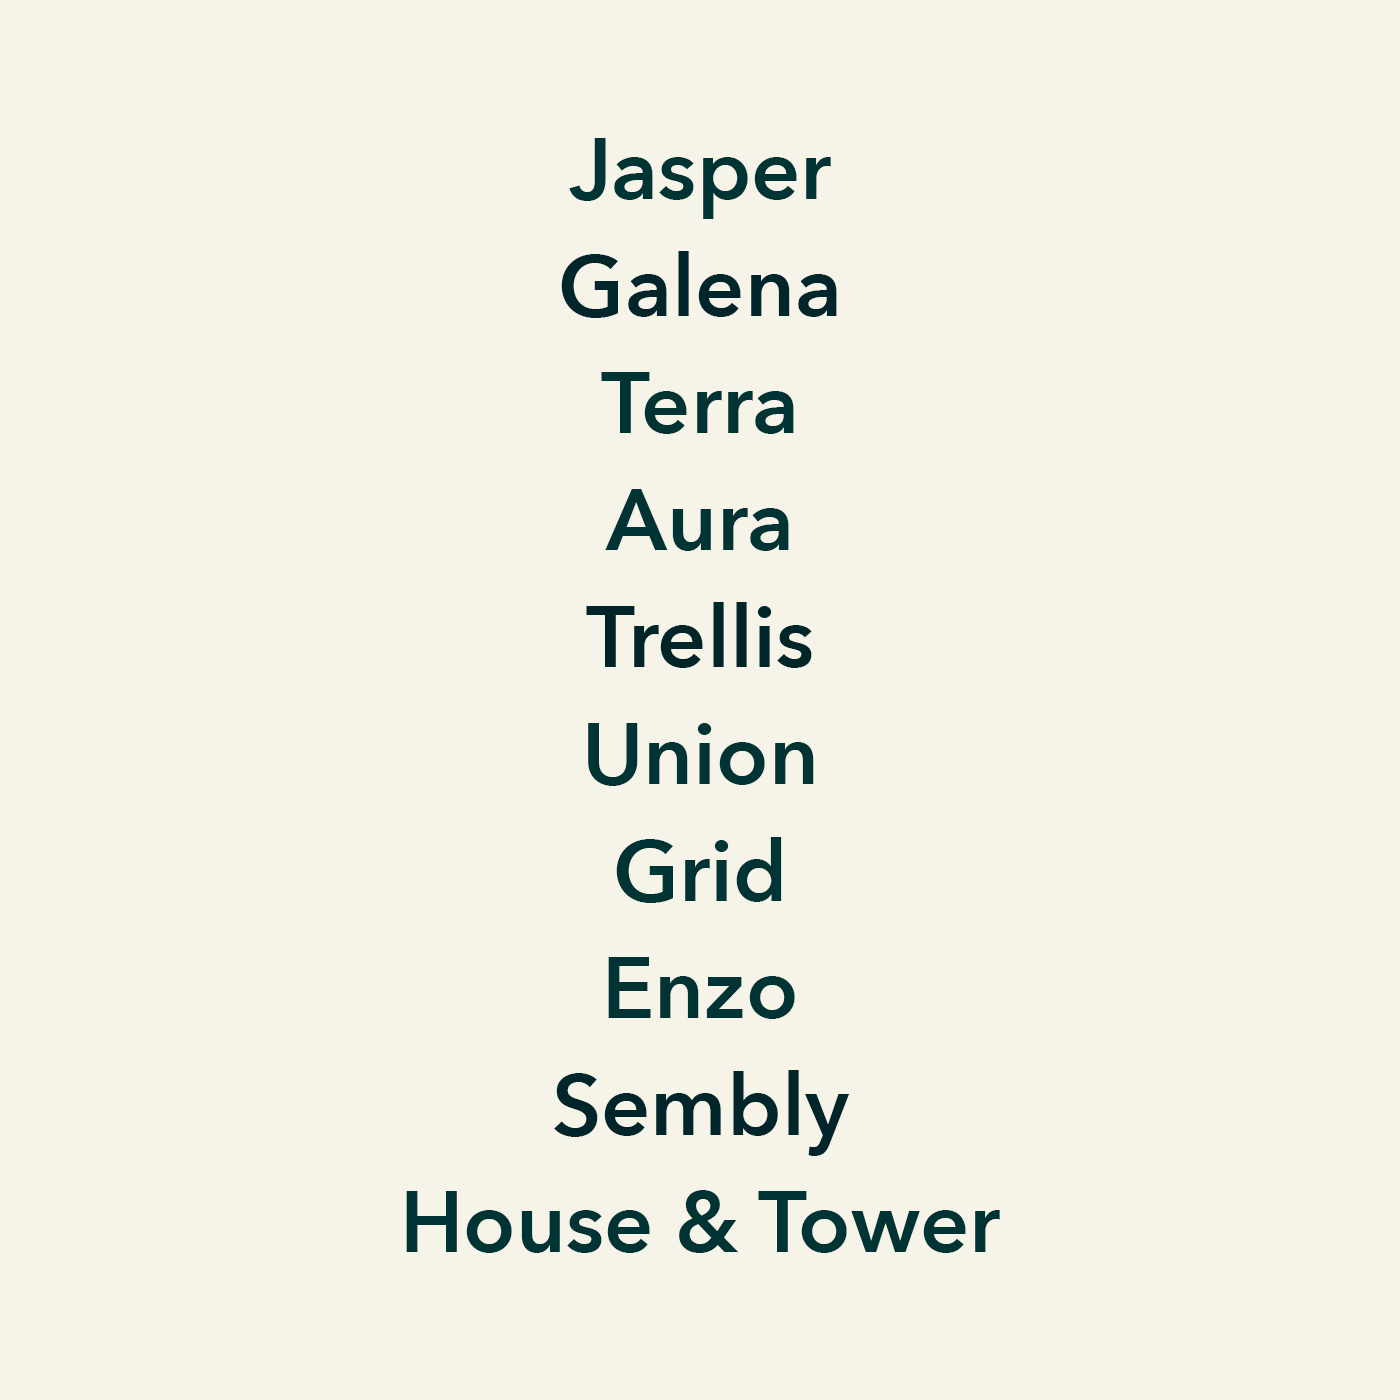 Animated gif showing potential names for the residential development branding